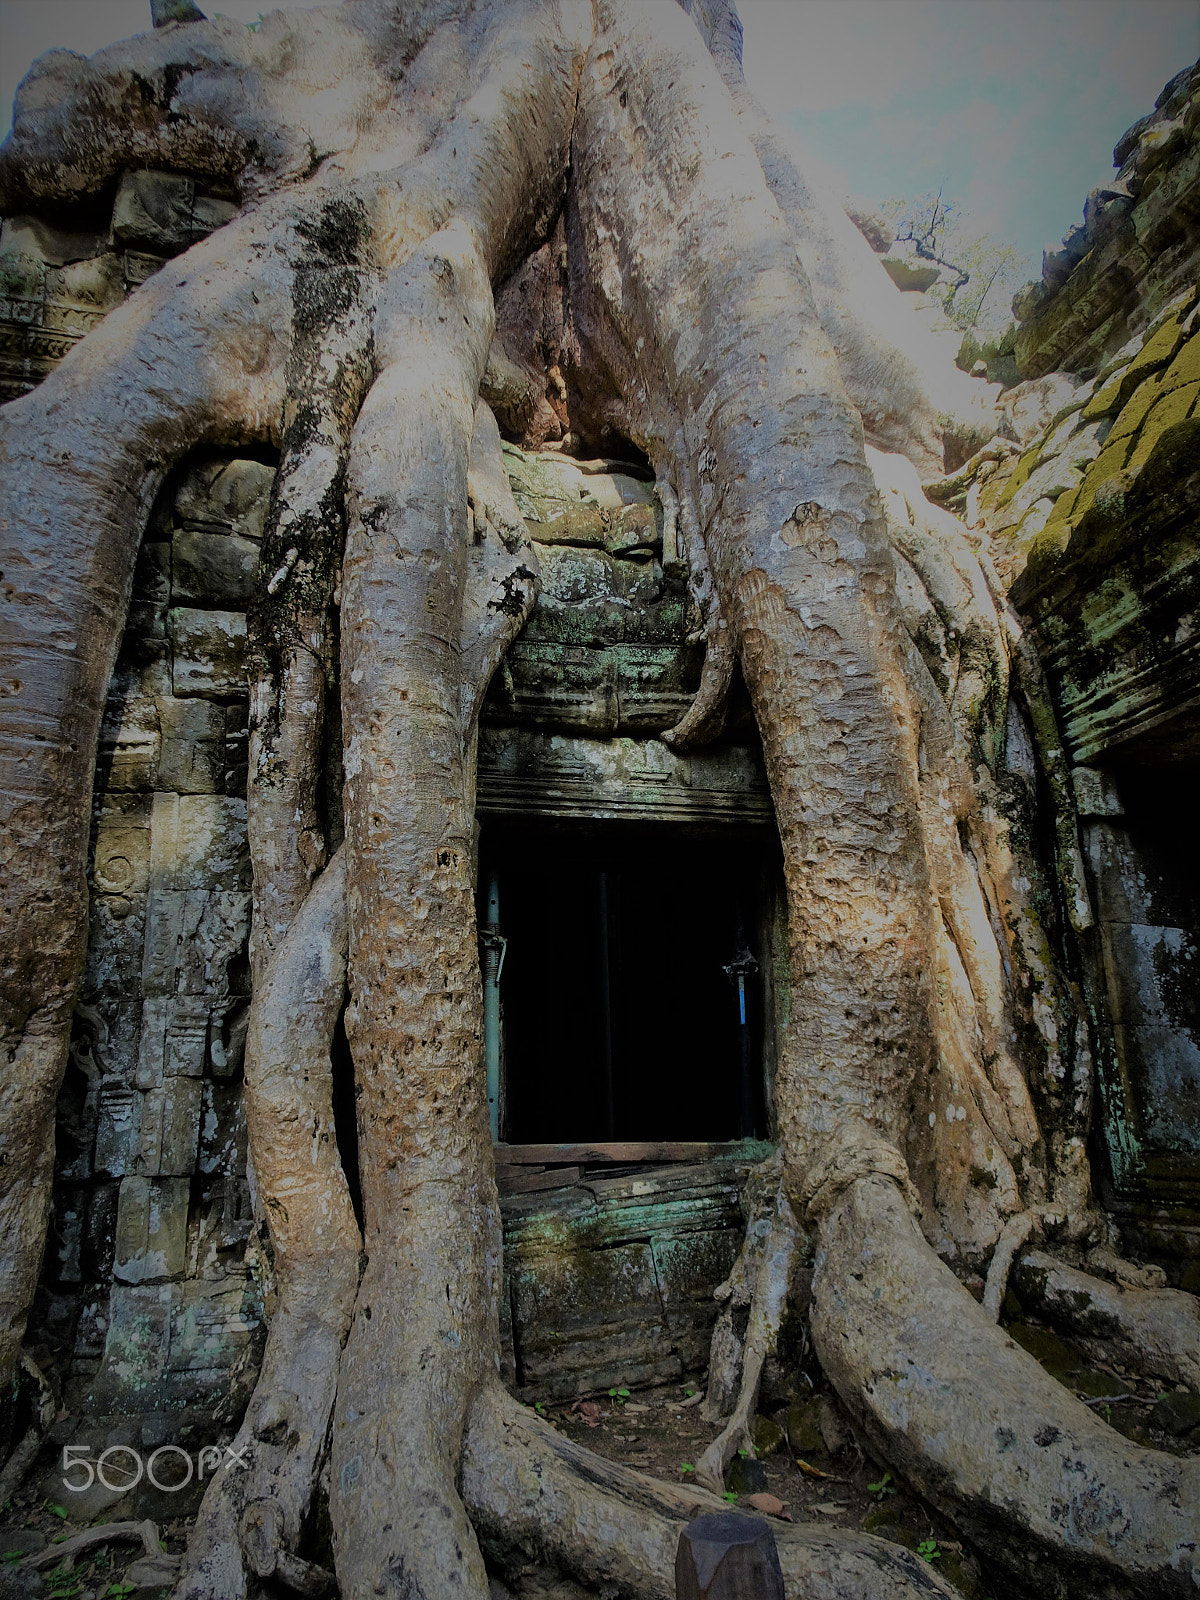 Sony Cyber-shot DSC-HX80 sample photo. Tree roots strangling a temple in ta prohm, angkor photography